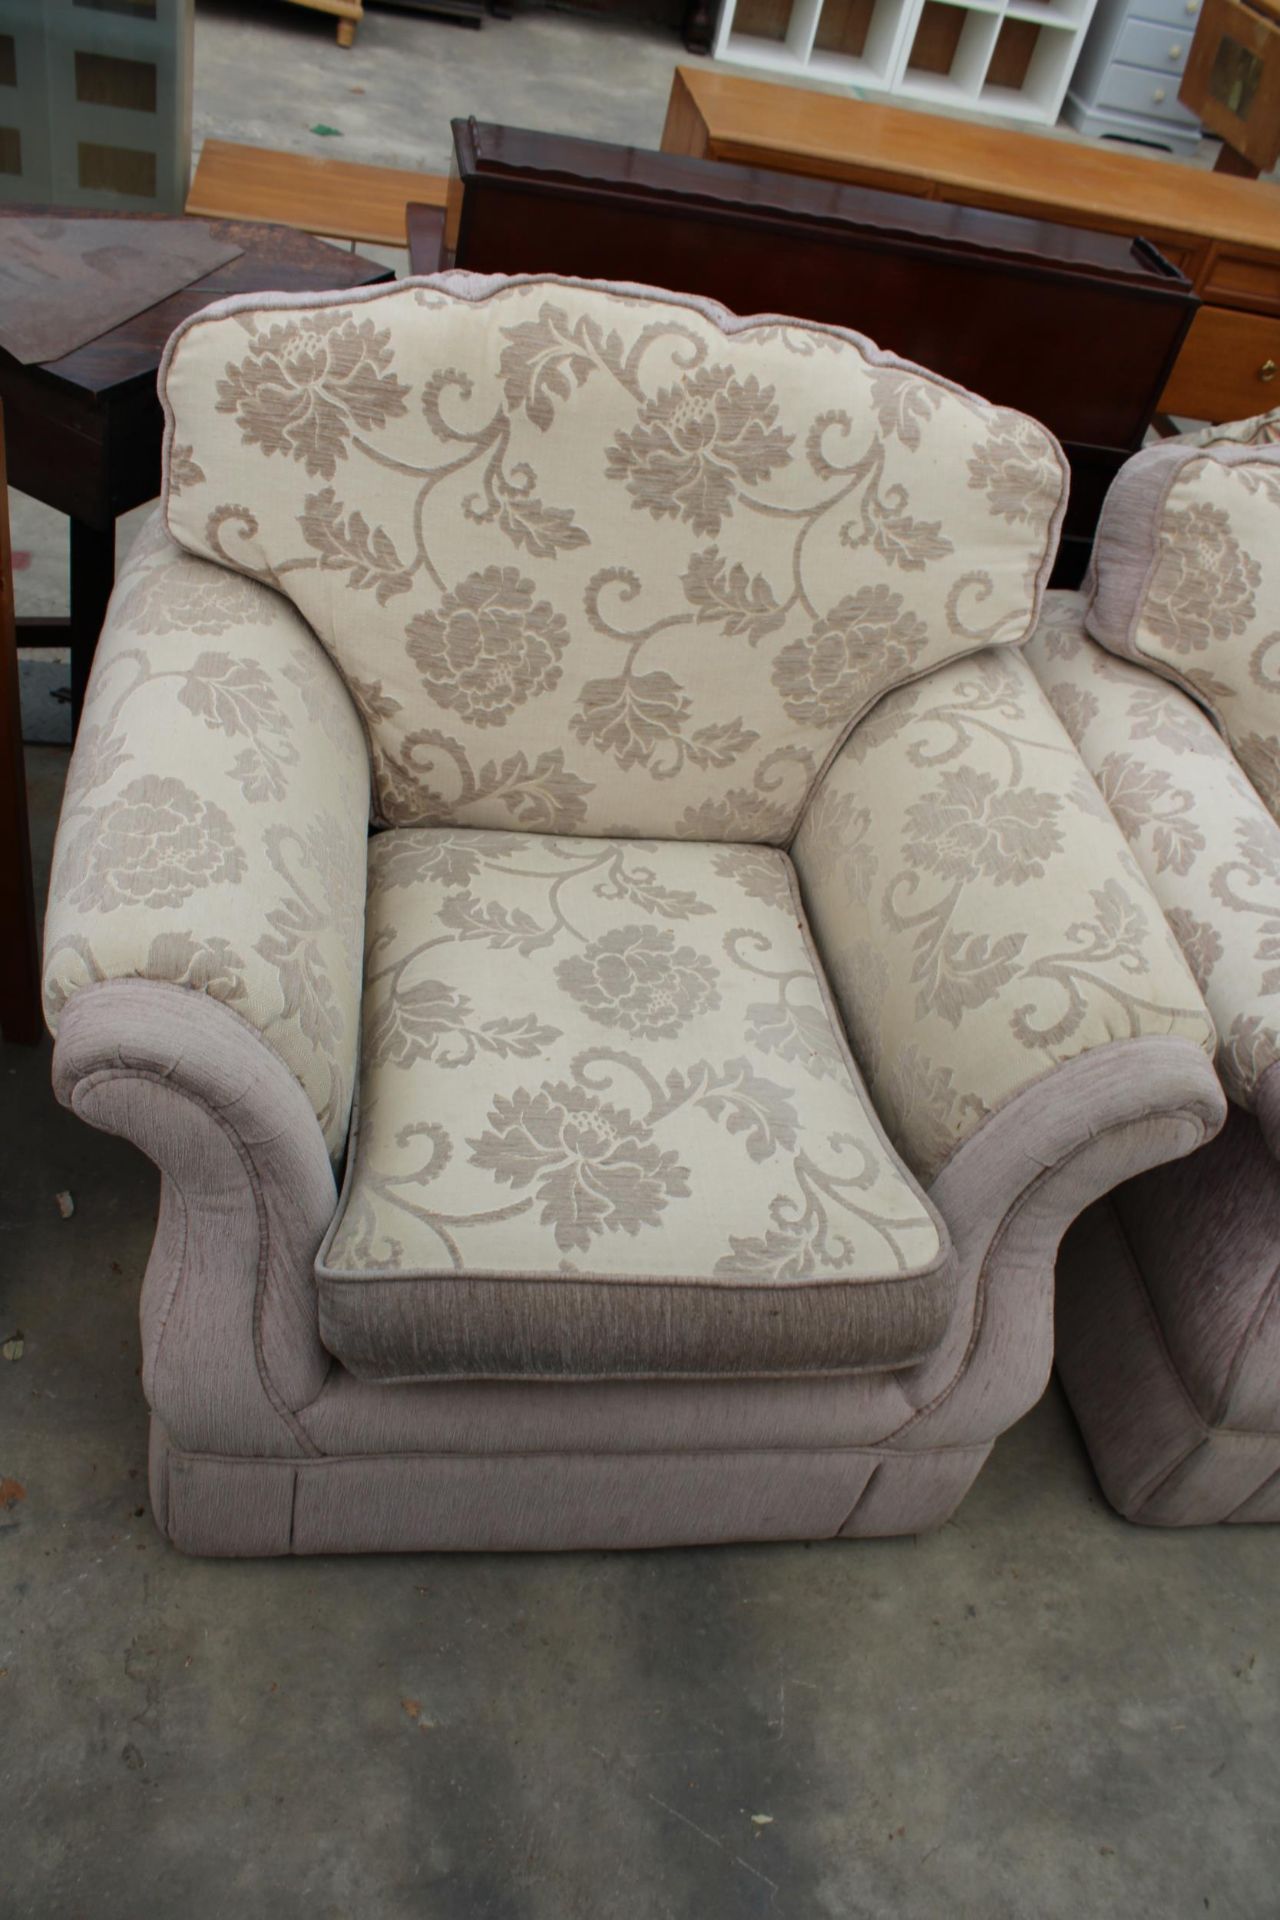 A MODERN FLORAL THREE PIECE SUITE WITH SIX LOOSE CUSHIONS - Image 2 of 6